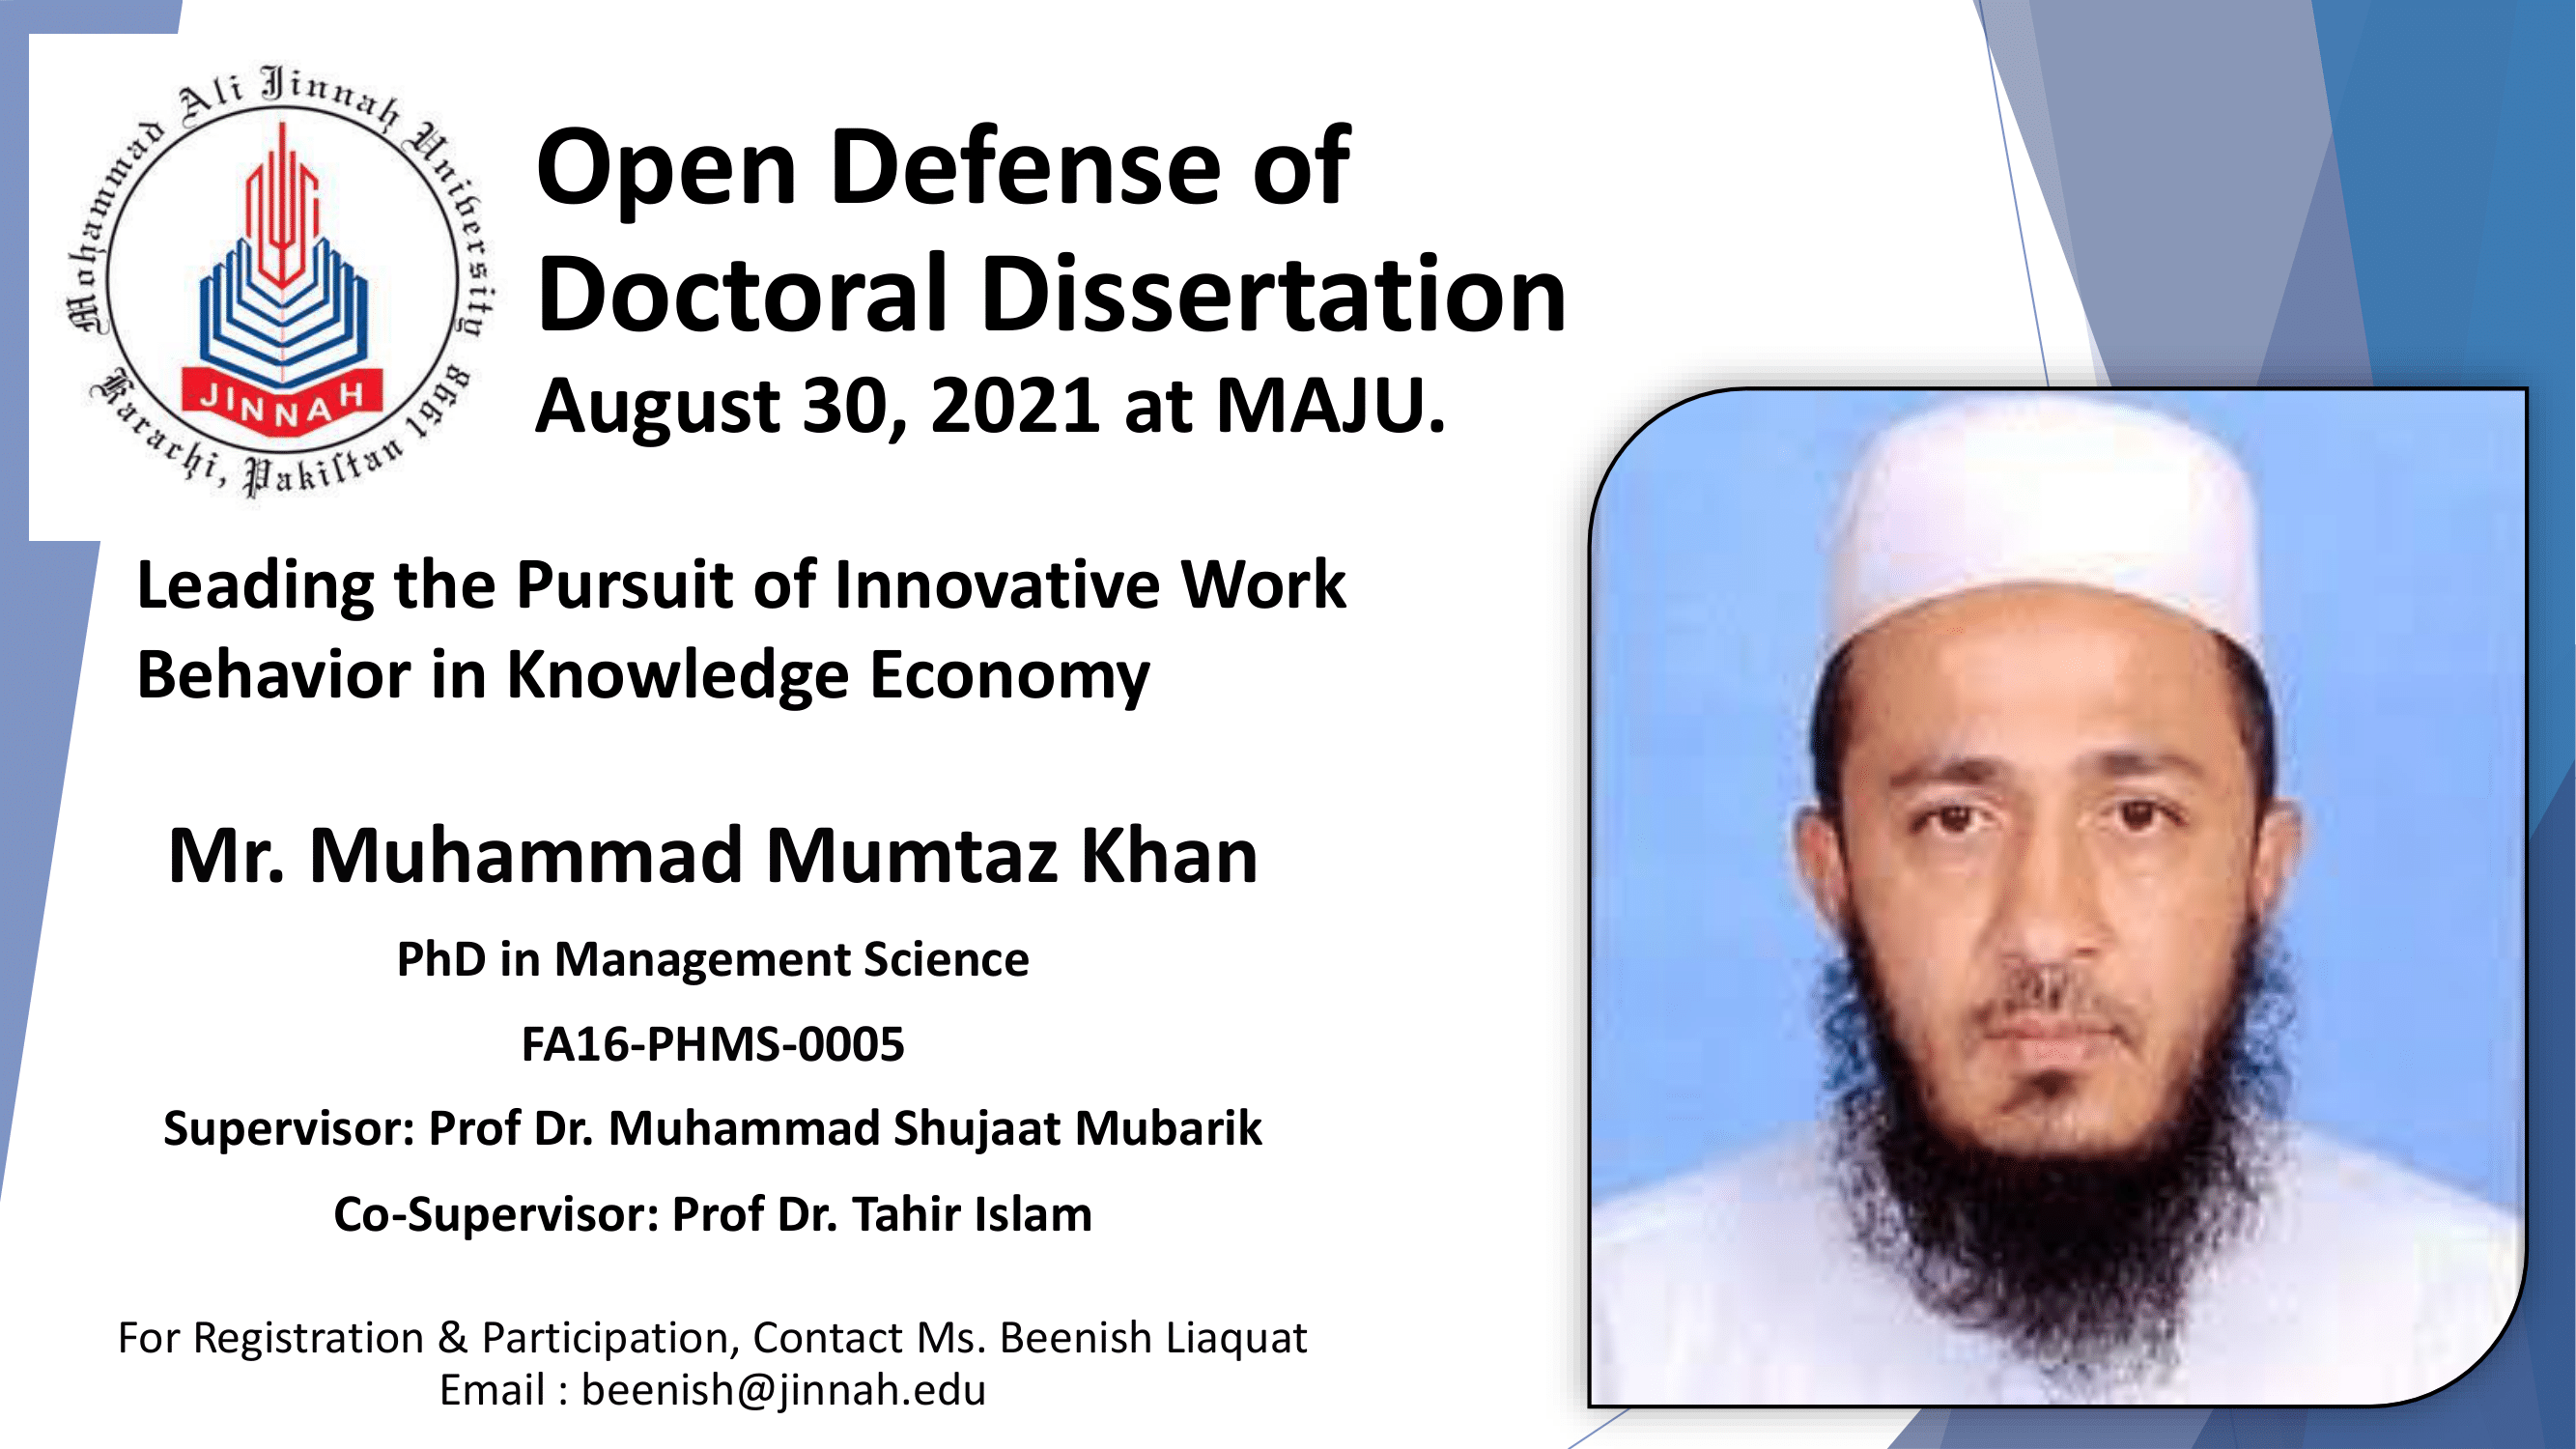 Open Defense of Doctoral Dissertation, August 30, 2021 at MAJU.